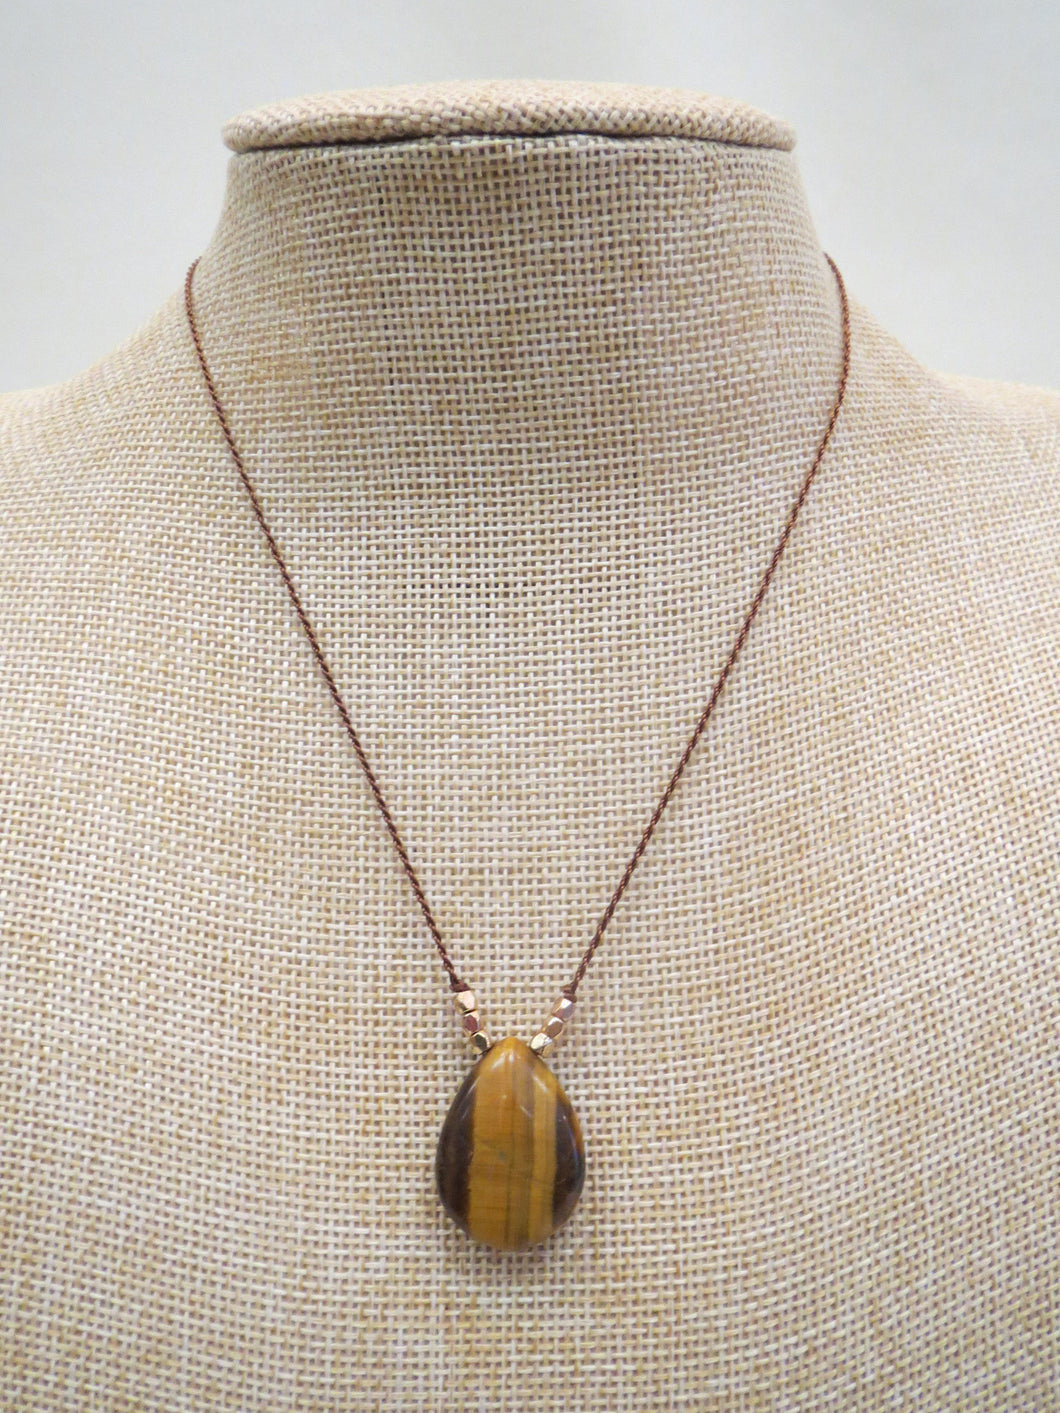 ADO Stone Bead on Thread Necklace | All Dec'd Out